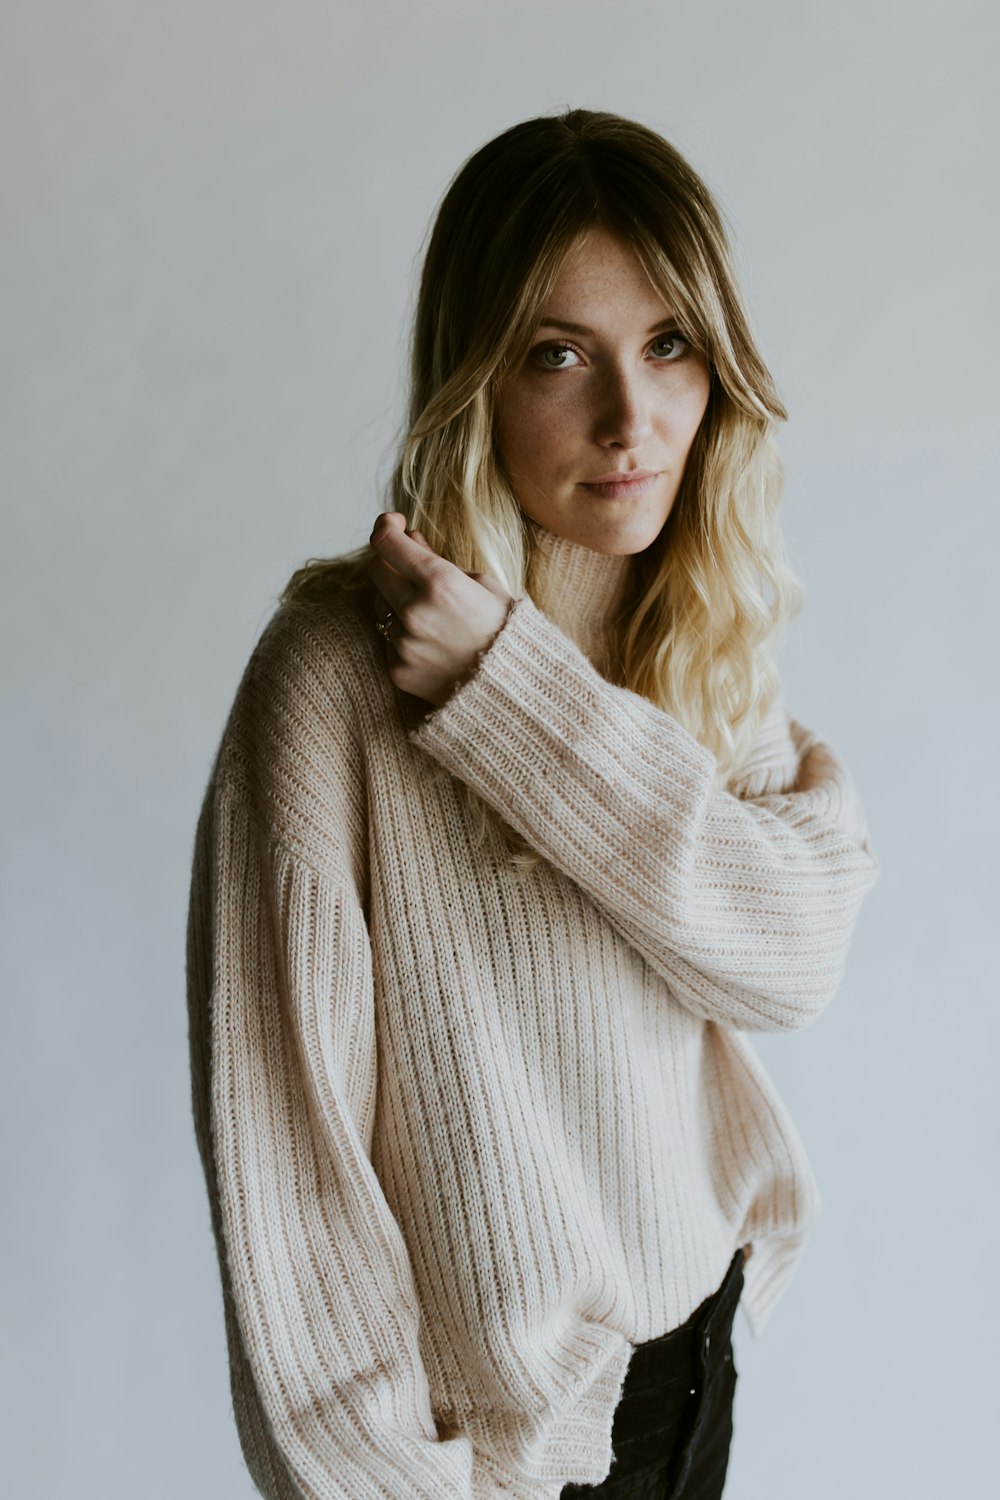 A portrait of a blonde woman wearing a sweater in Springfield